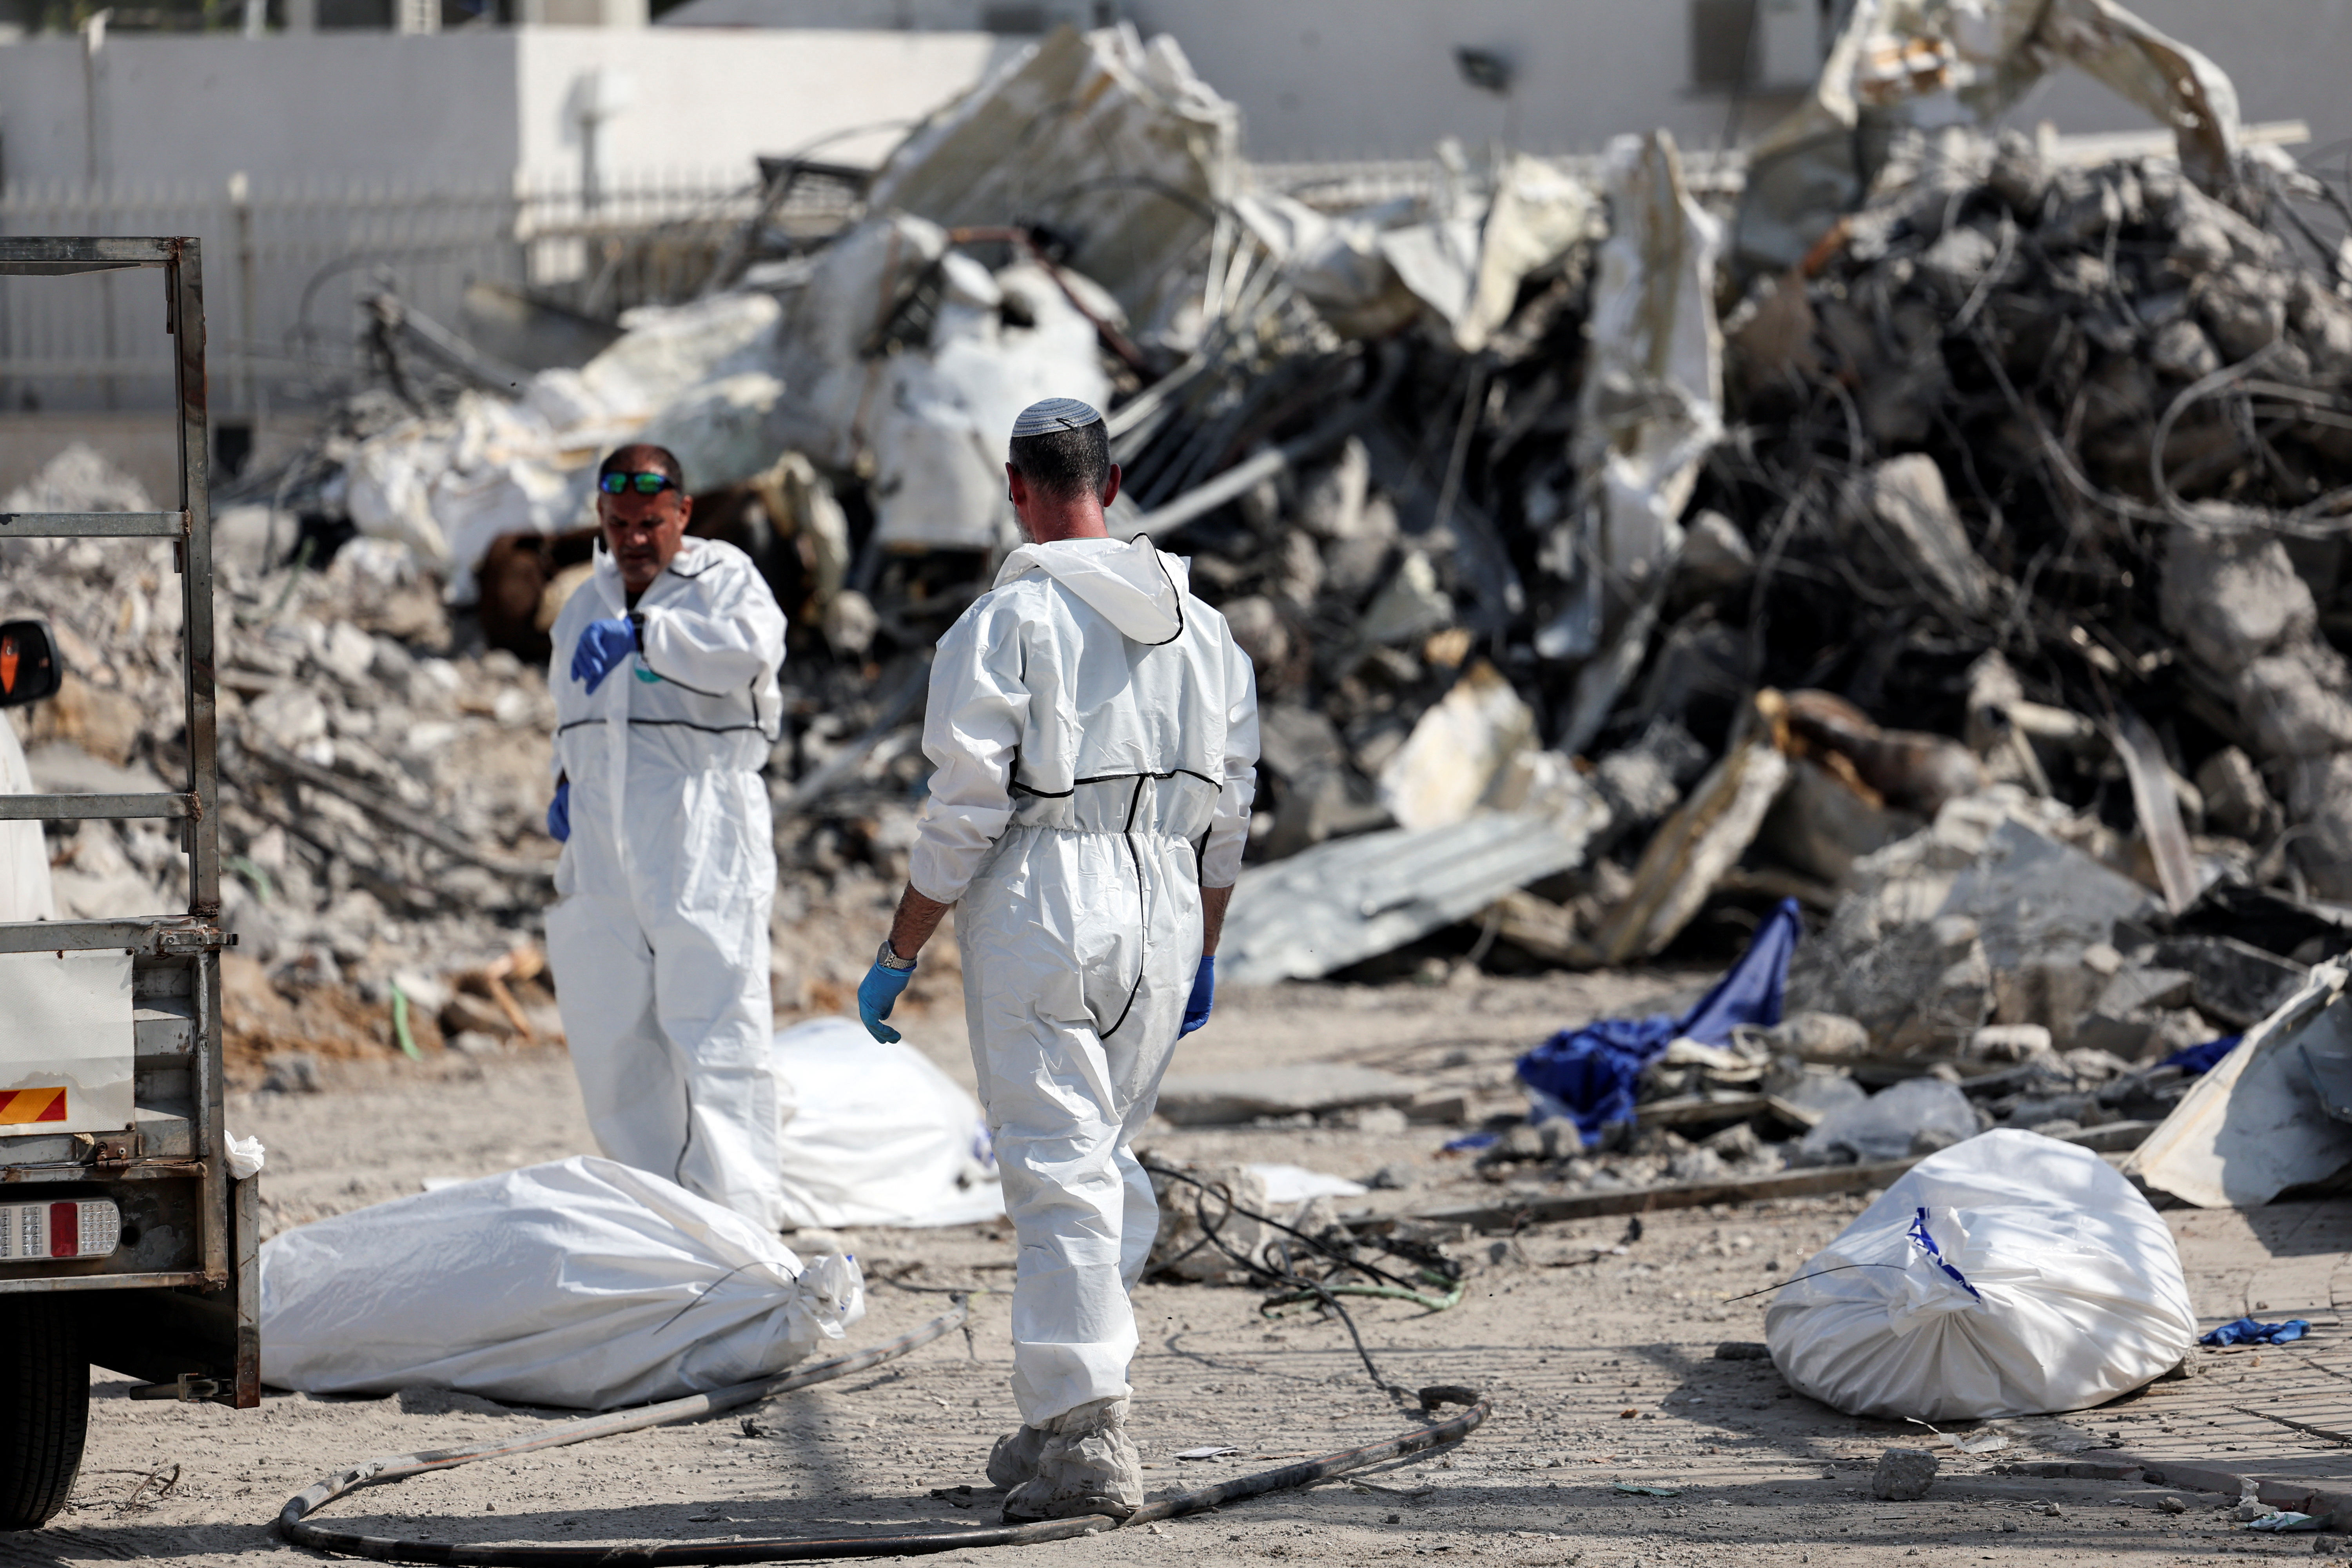 Israeli rescue workers work to remove dead bodies from near a destroyed police station that was the site of a battle following a mass-infiltration by Hamas gunmen from the Gaza Strip, In Sderot